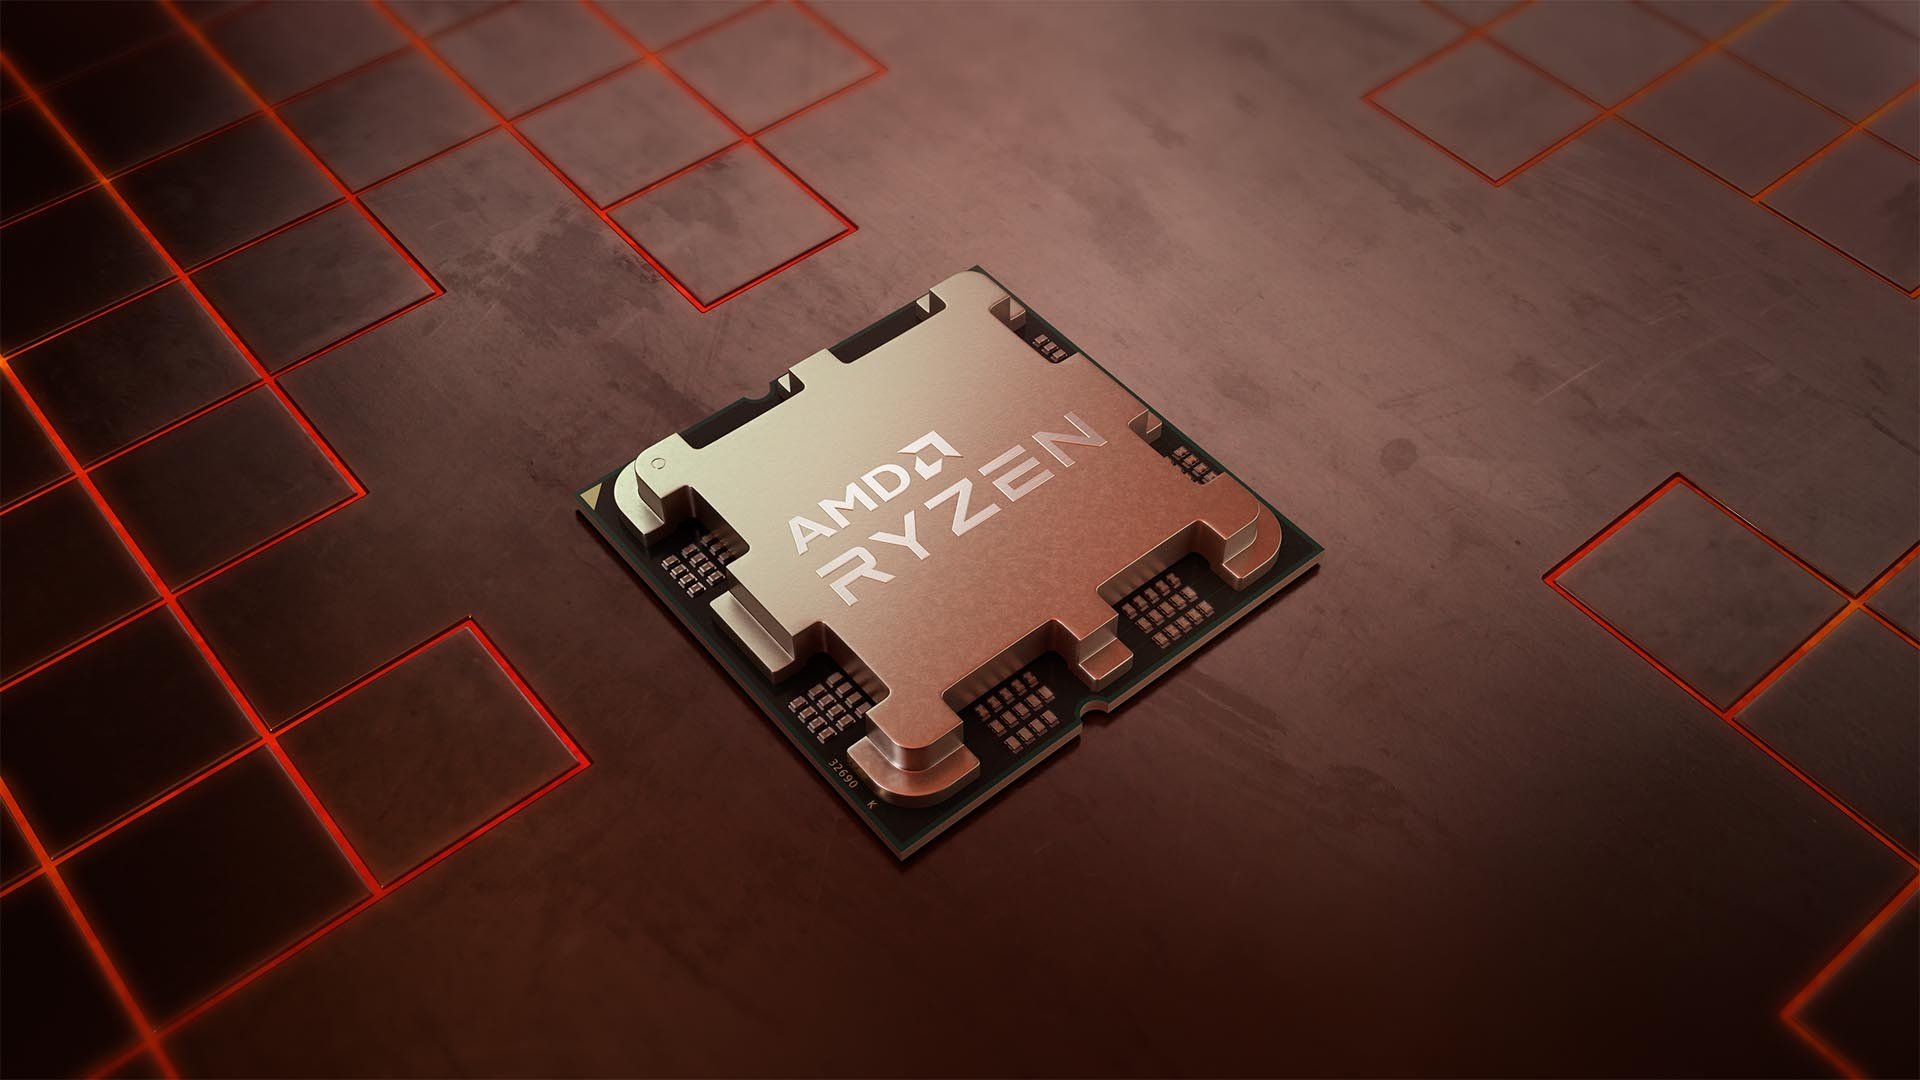 It lists the AMD Ryzen 7030 for mobile devices in a public document